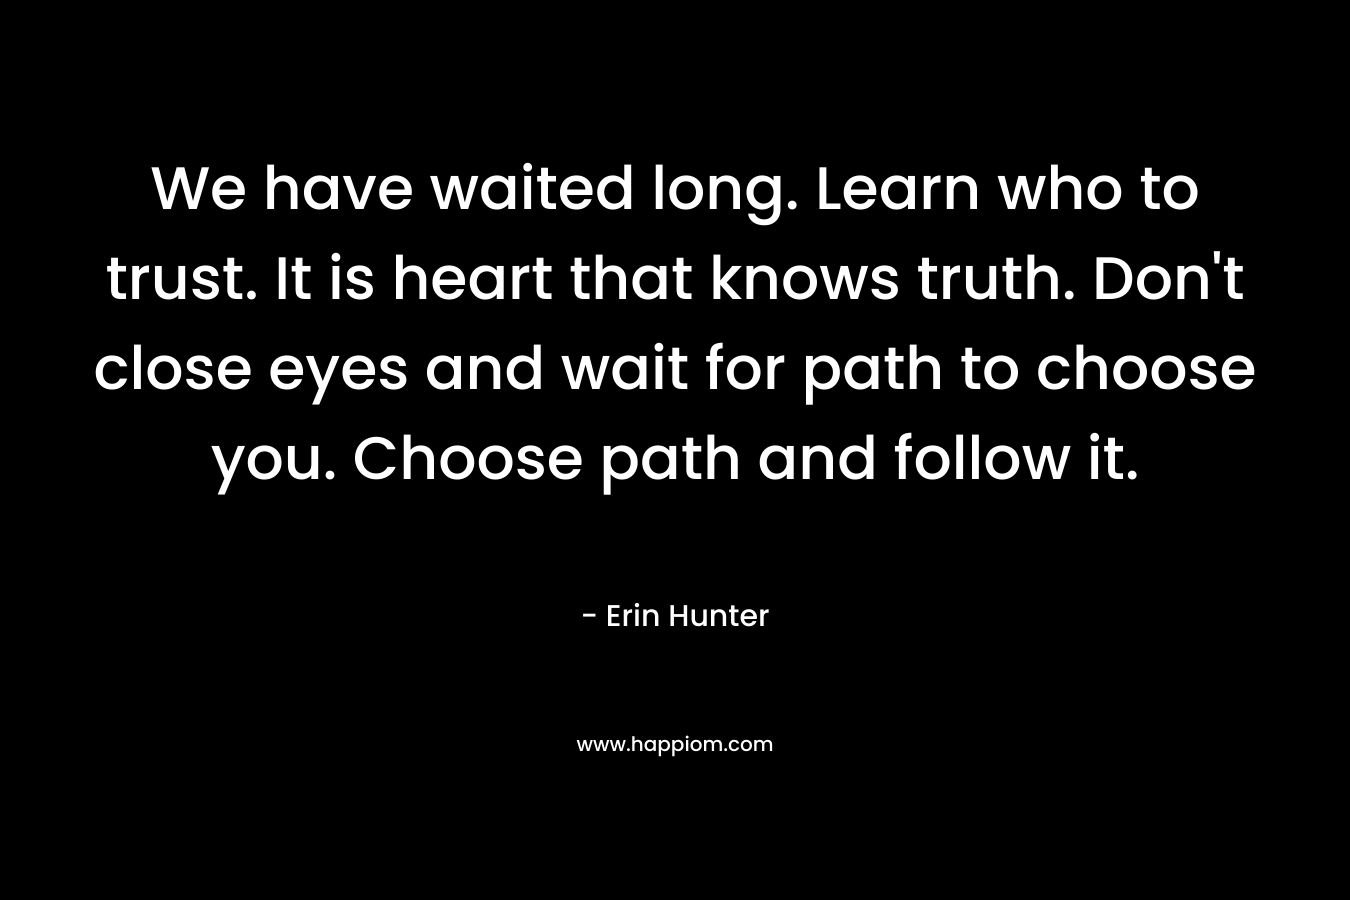 We have waited long. Learn who to trust. It is heart that knows truth. Don't close eyes and wait for path to choose you. Choose path and follow it.